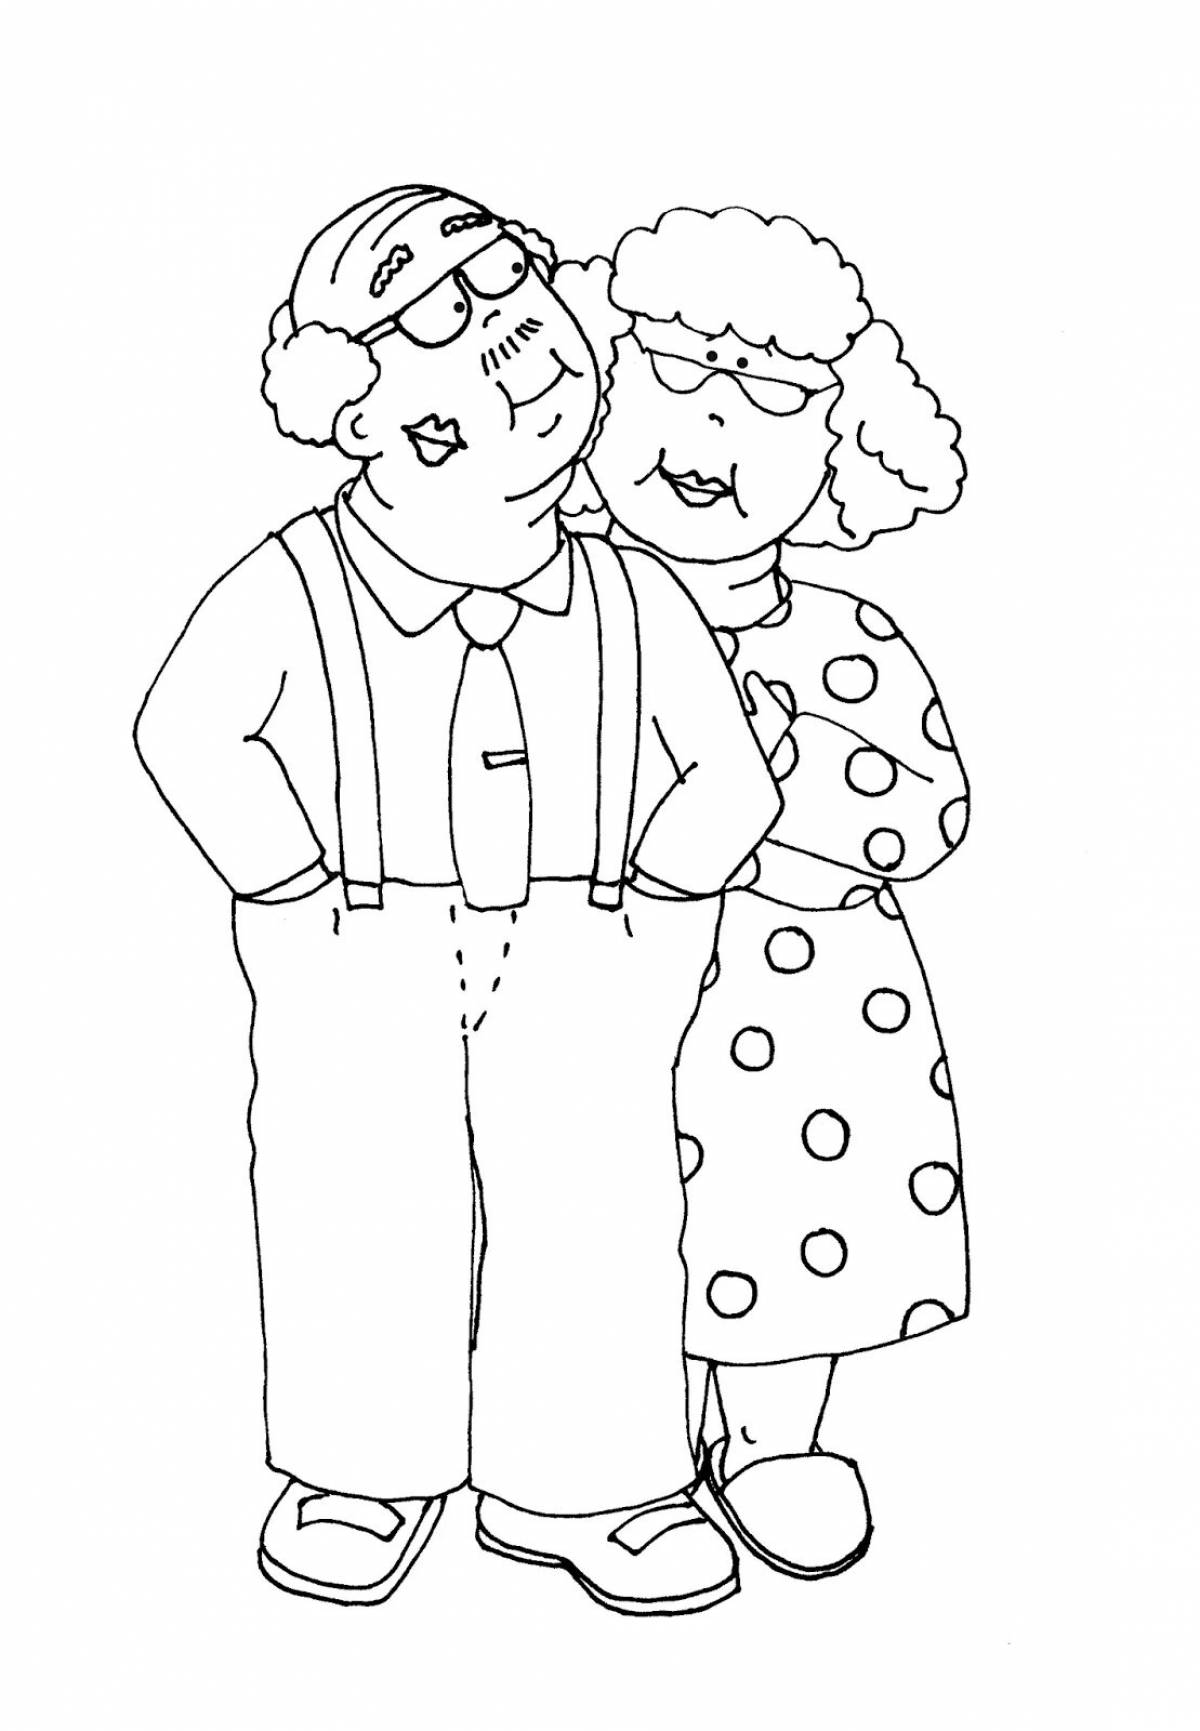 Adorable grandparents coloring pages for kids